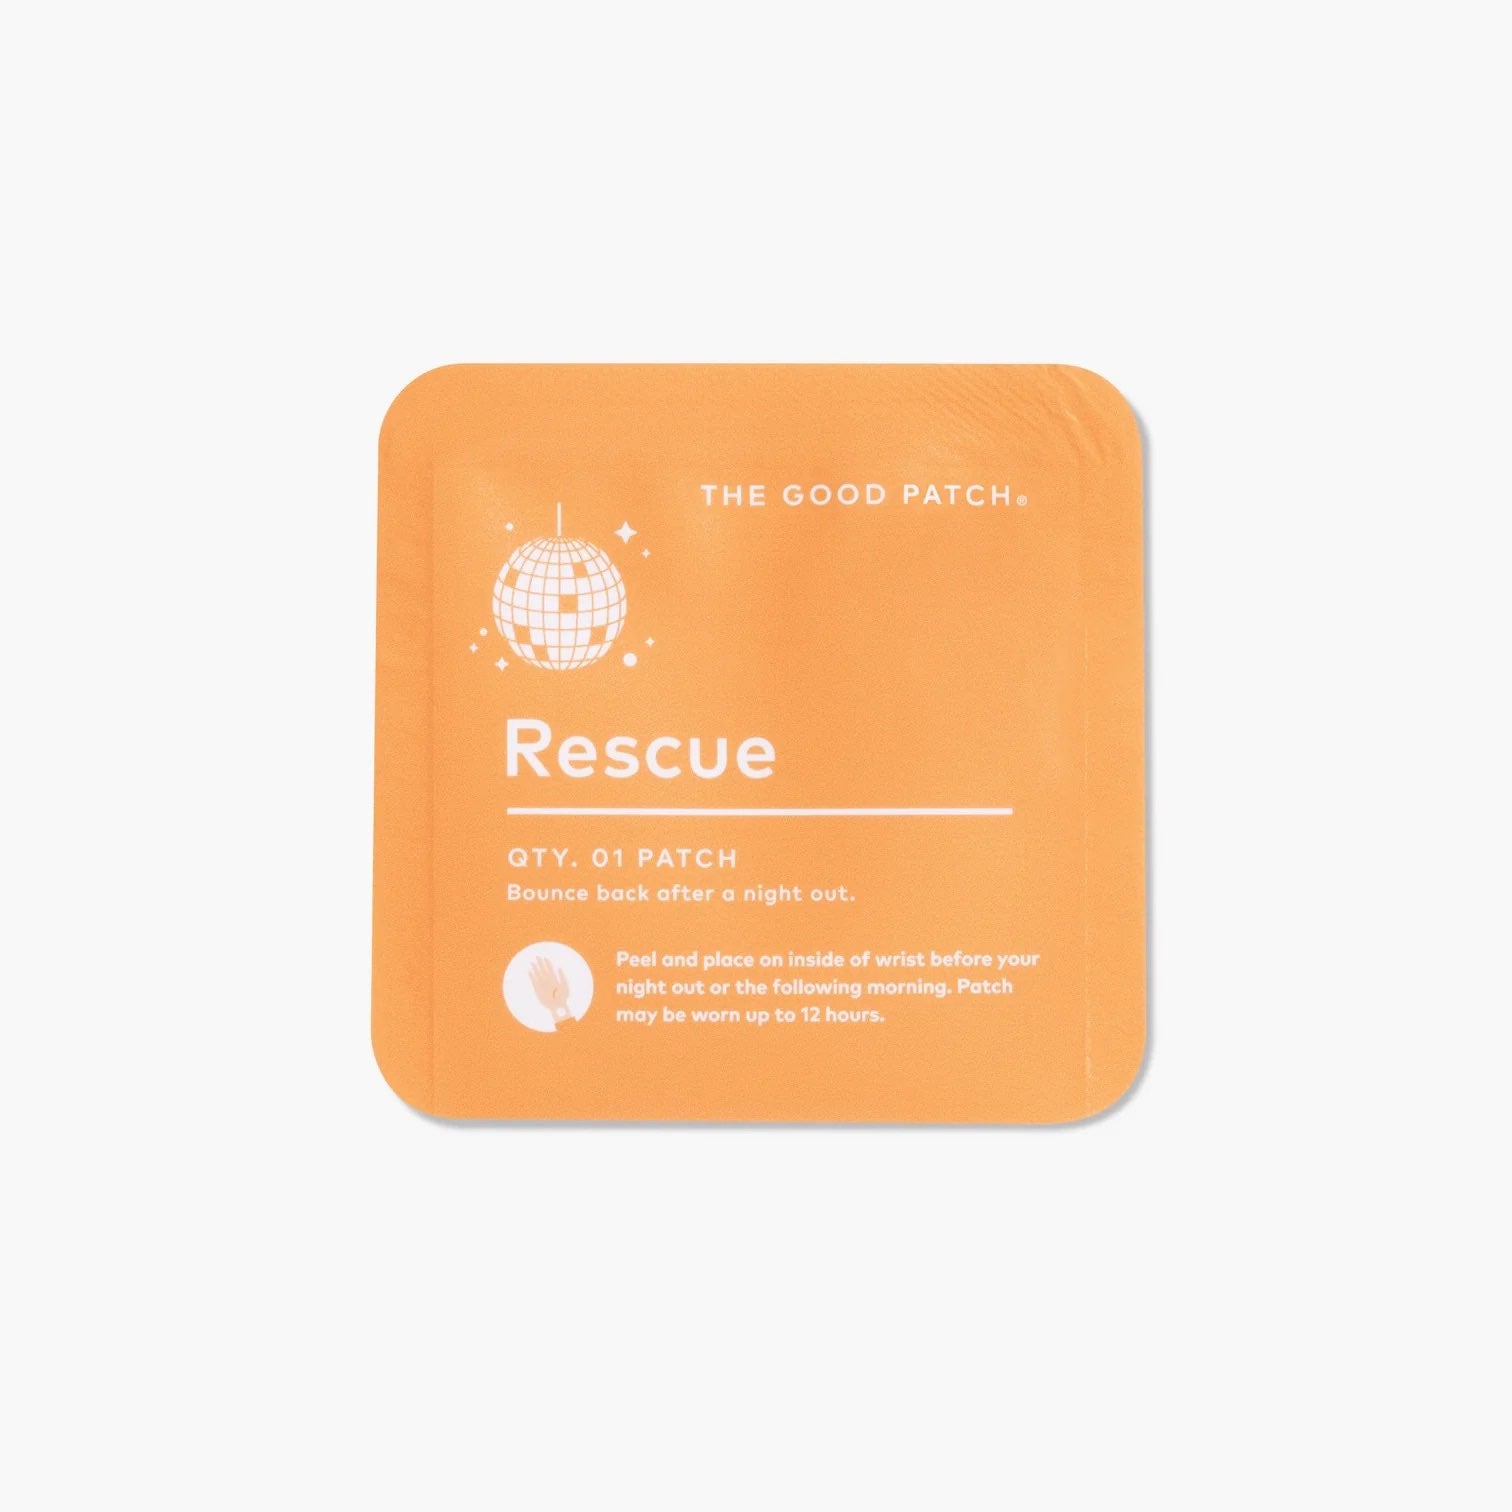 Live - Honest Review of Rescue The Good Patch Pack of 4